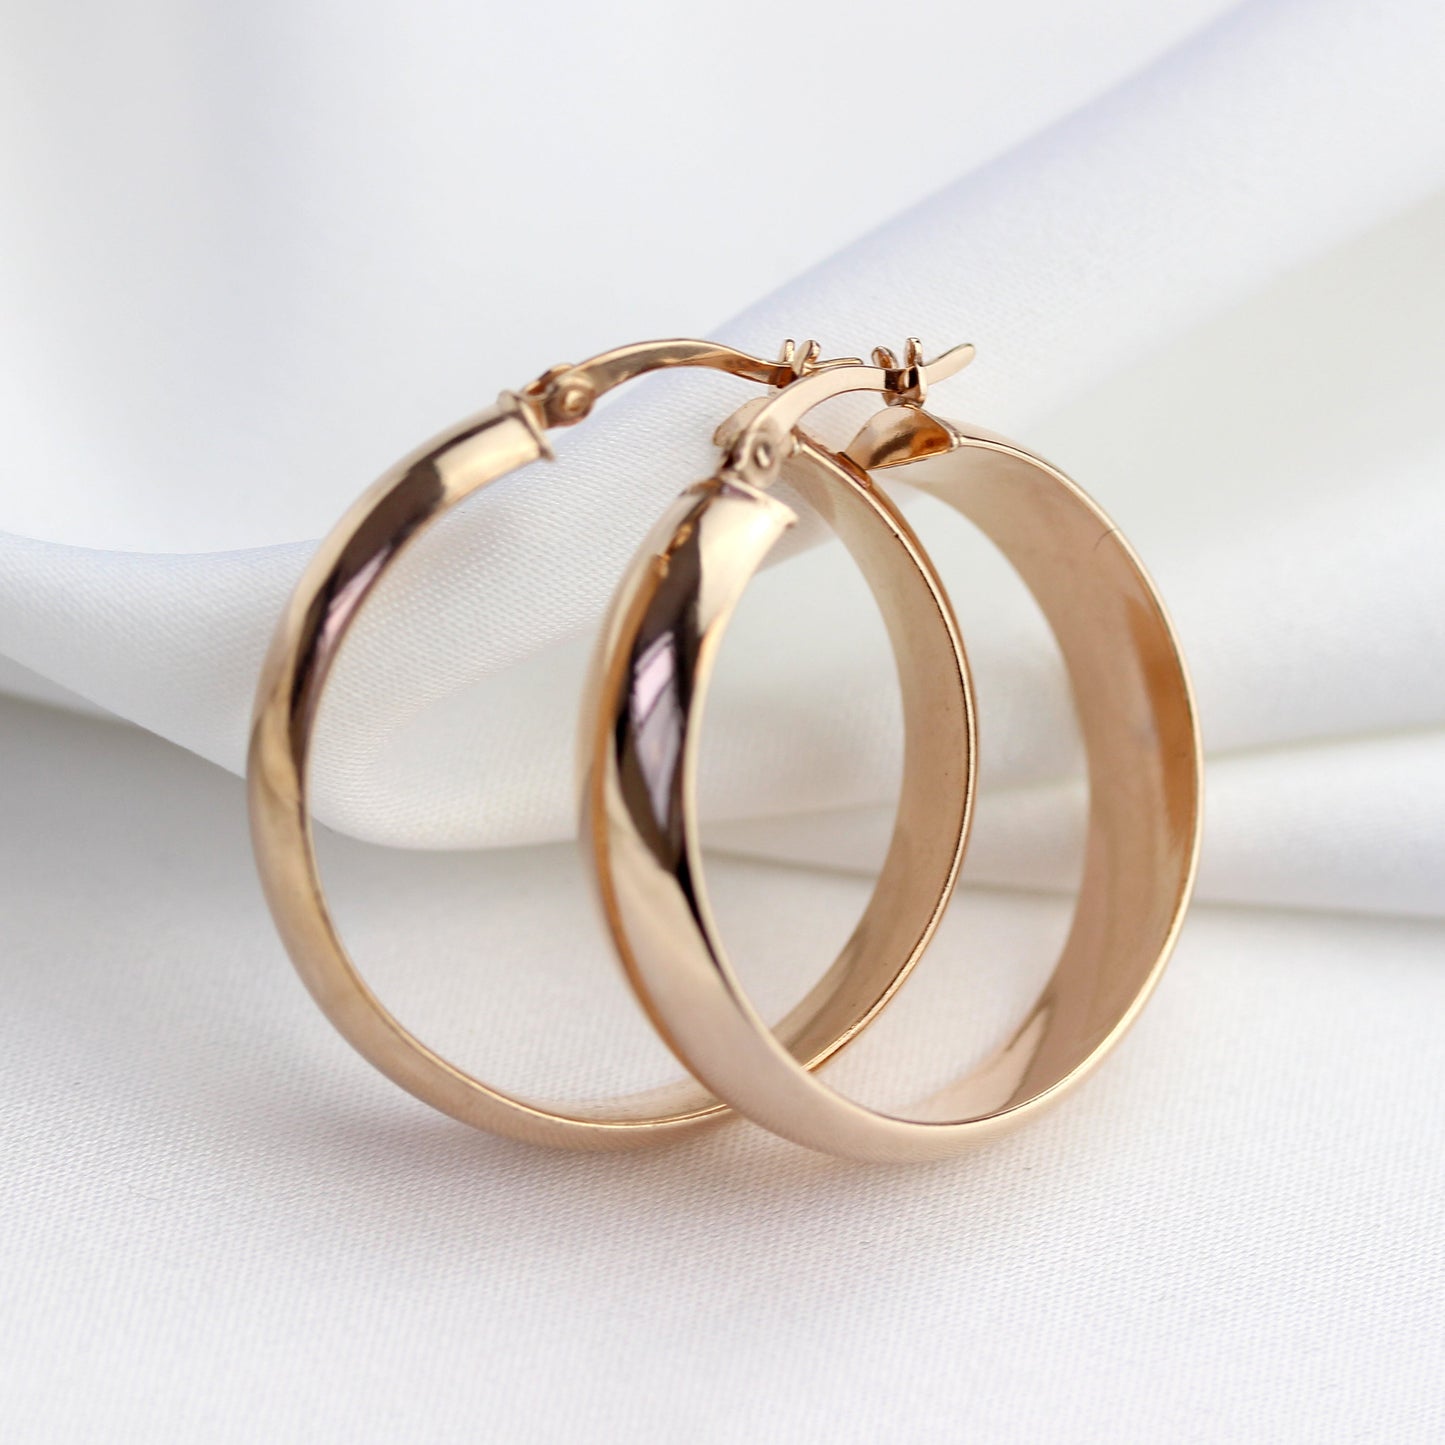 Rose Gold Plated Sterling Silver Chunky Creole 30mm Hoop Earrings